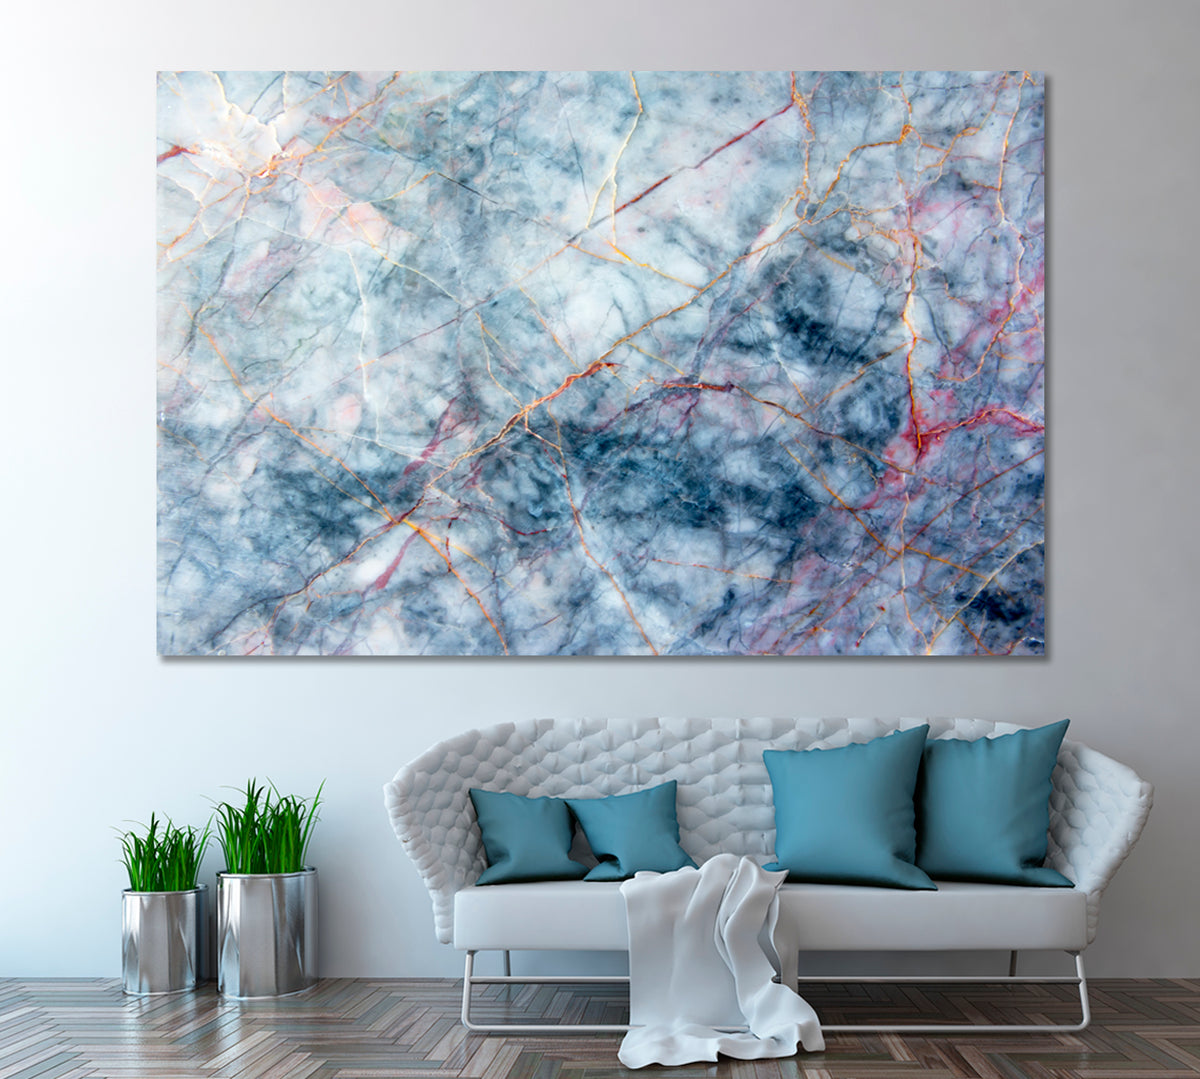 Blue Marble Canvas Print ArtLexy 1 Panel 24"x16" inches 